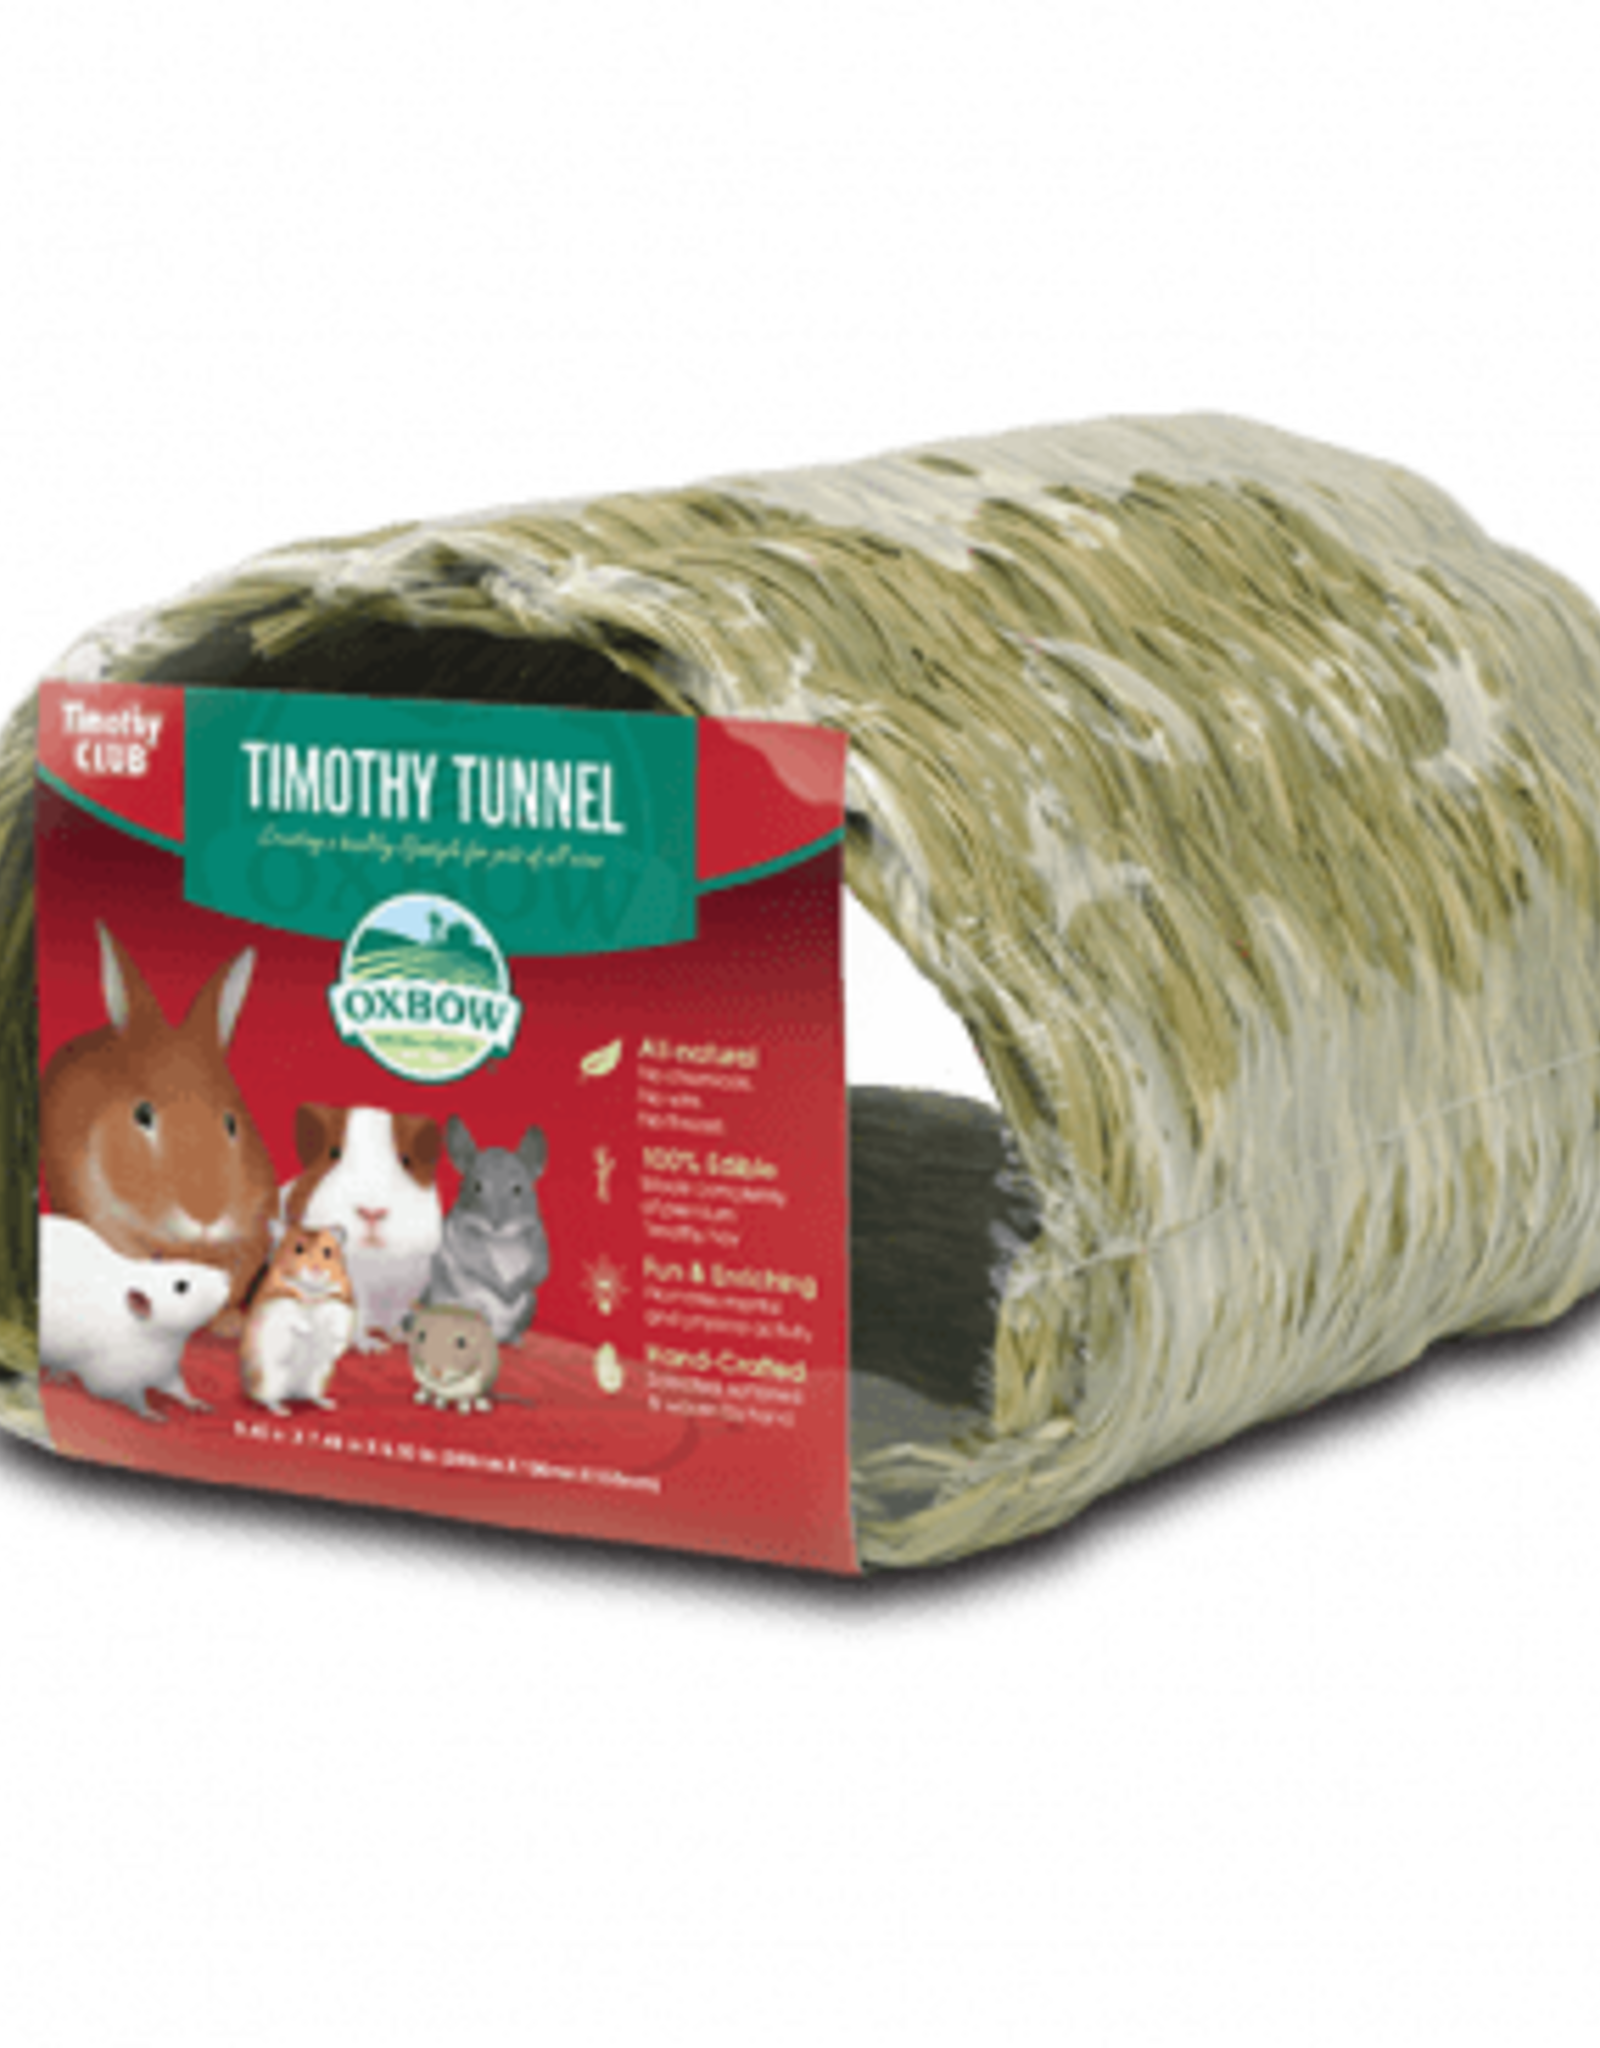 OXBOW PET PRODUCTS OXBOW TIMOTHY TUNNEL